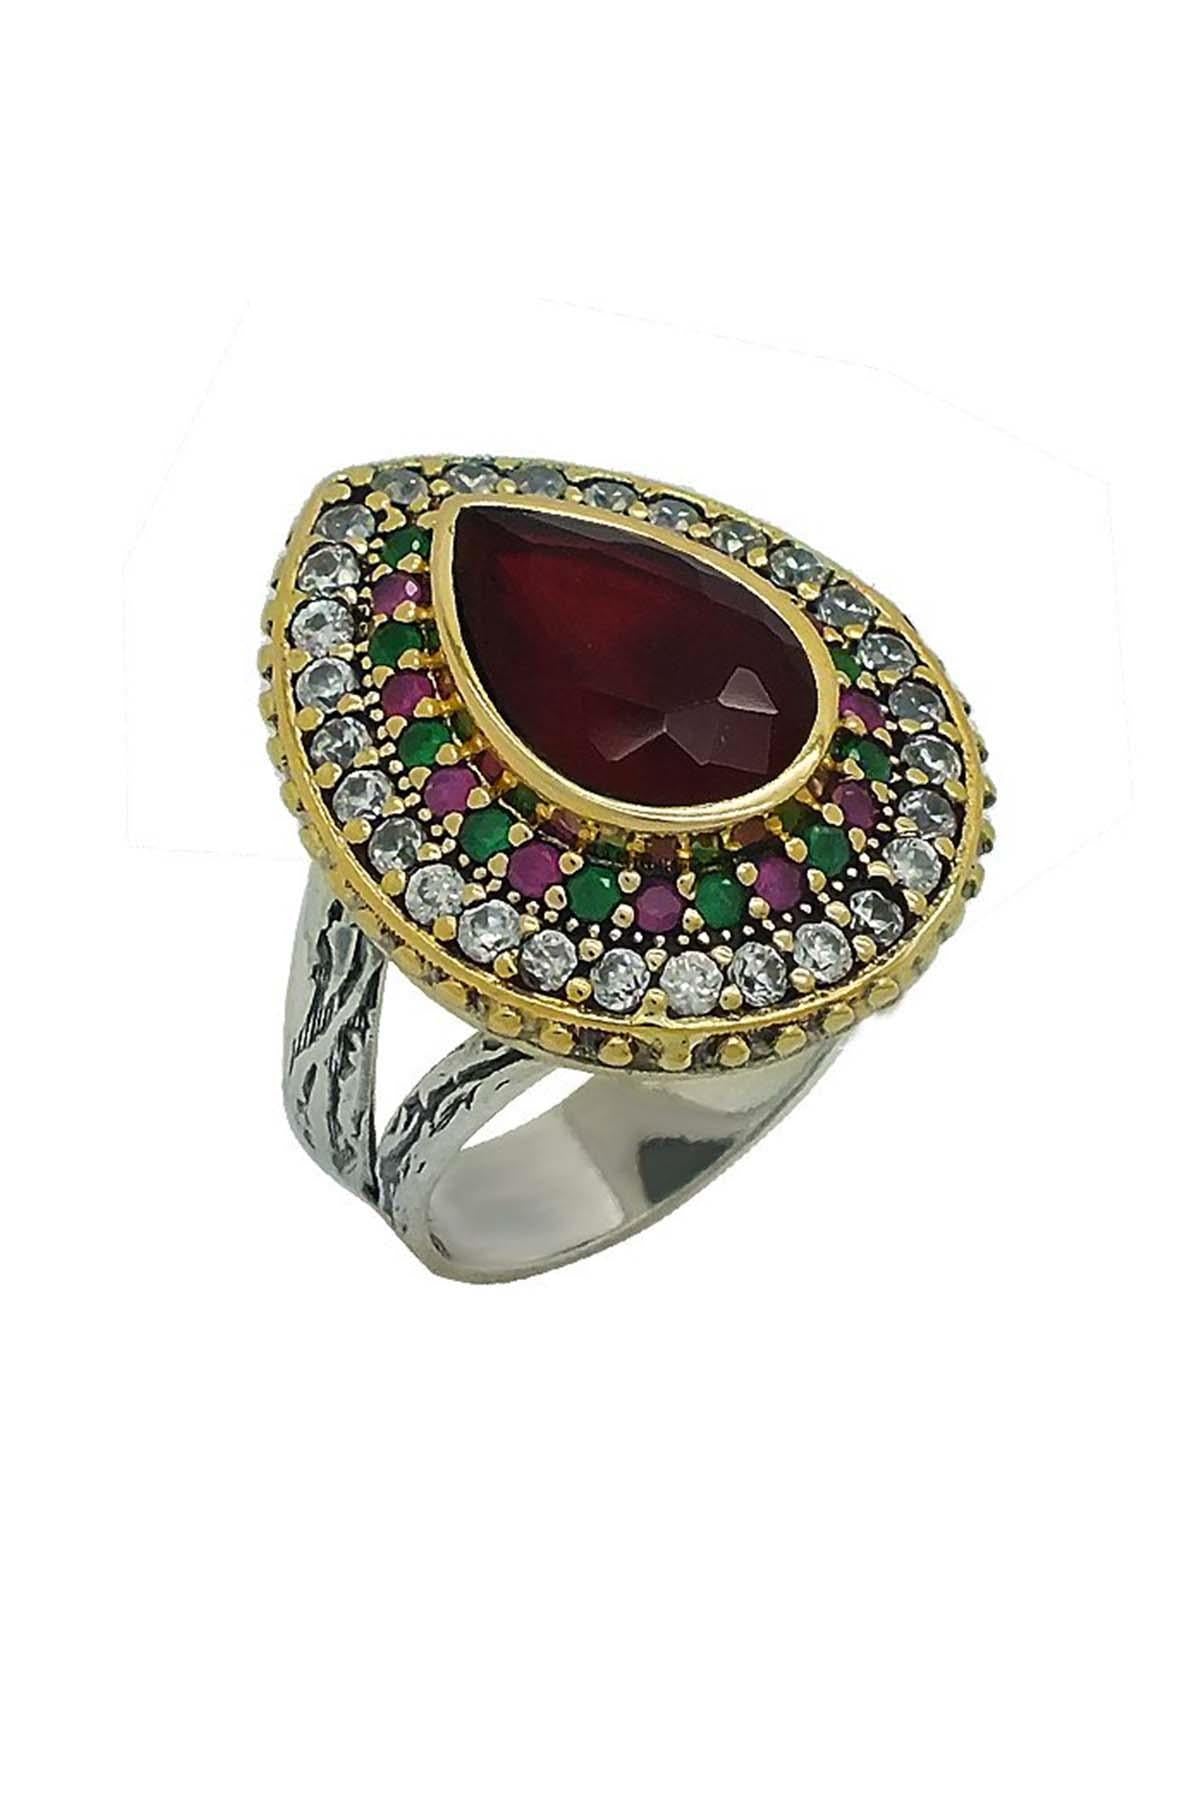 Ruby Stone Silver Authentic Women's Ring Hürrem Sultan Ring Models Adjustable